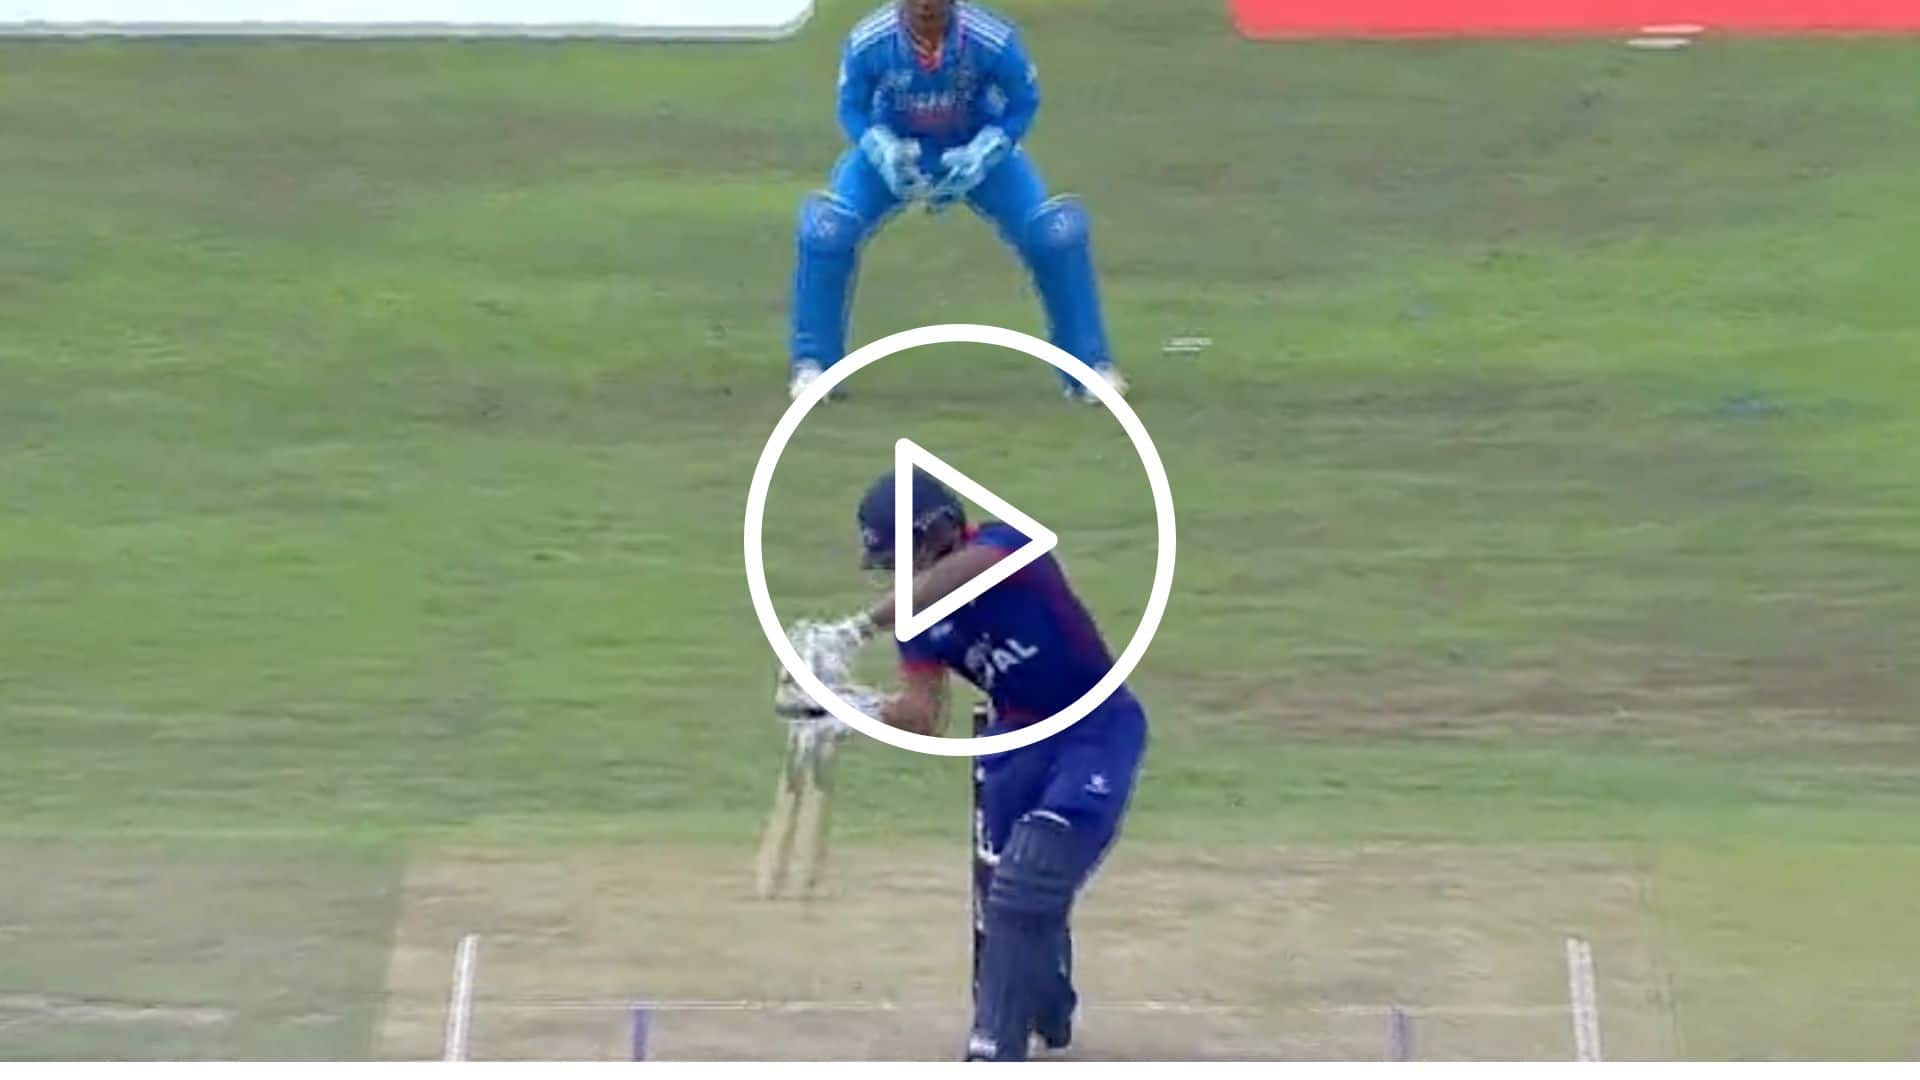 [Watch] Shardul Thakur - 'The Man With Golden Arm' Breaks Nepal's Brutal Opening Stand